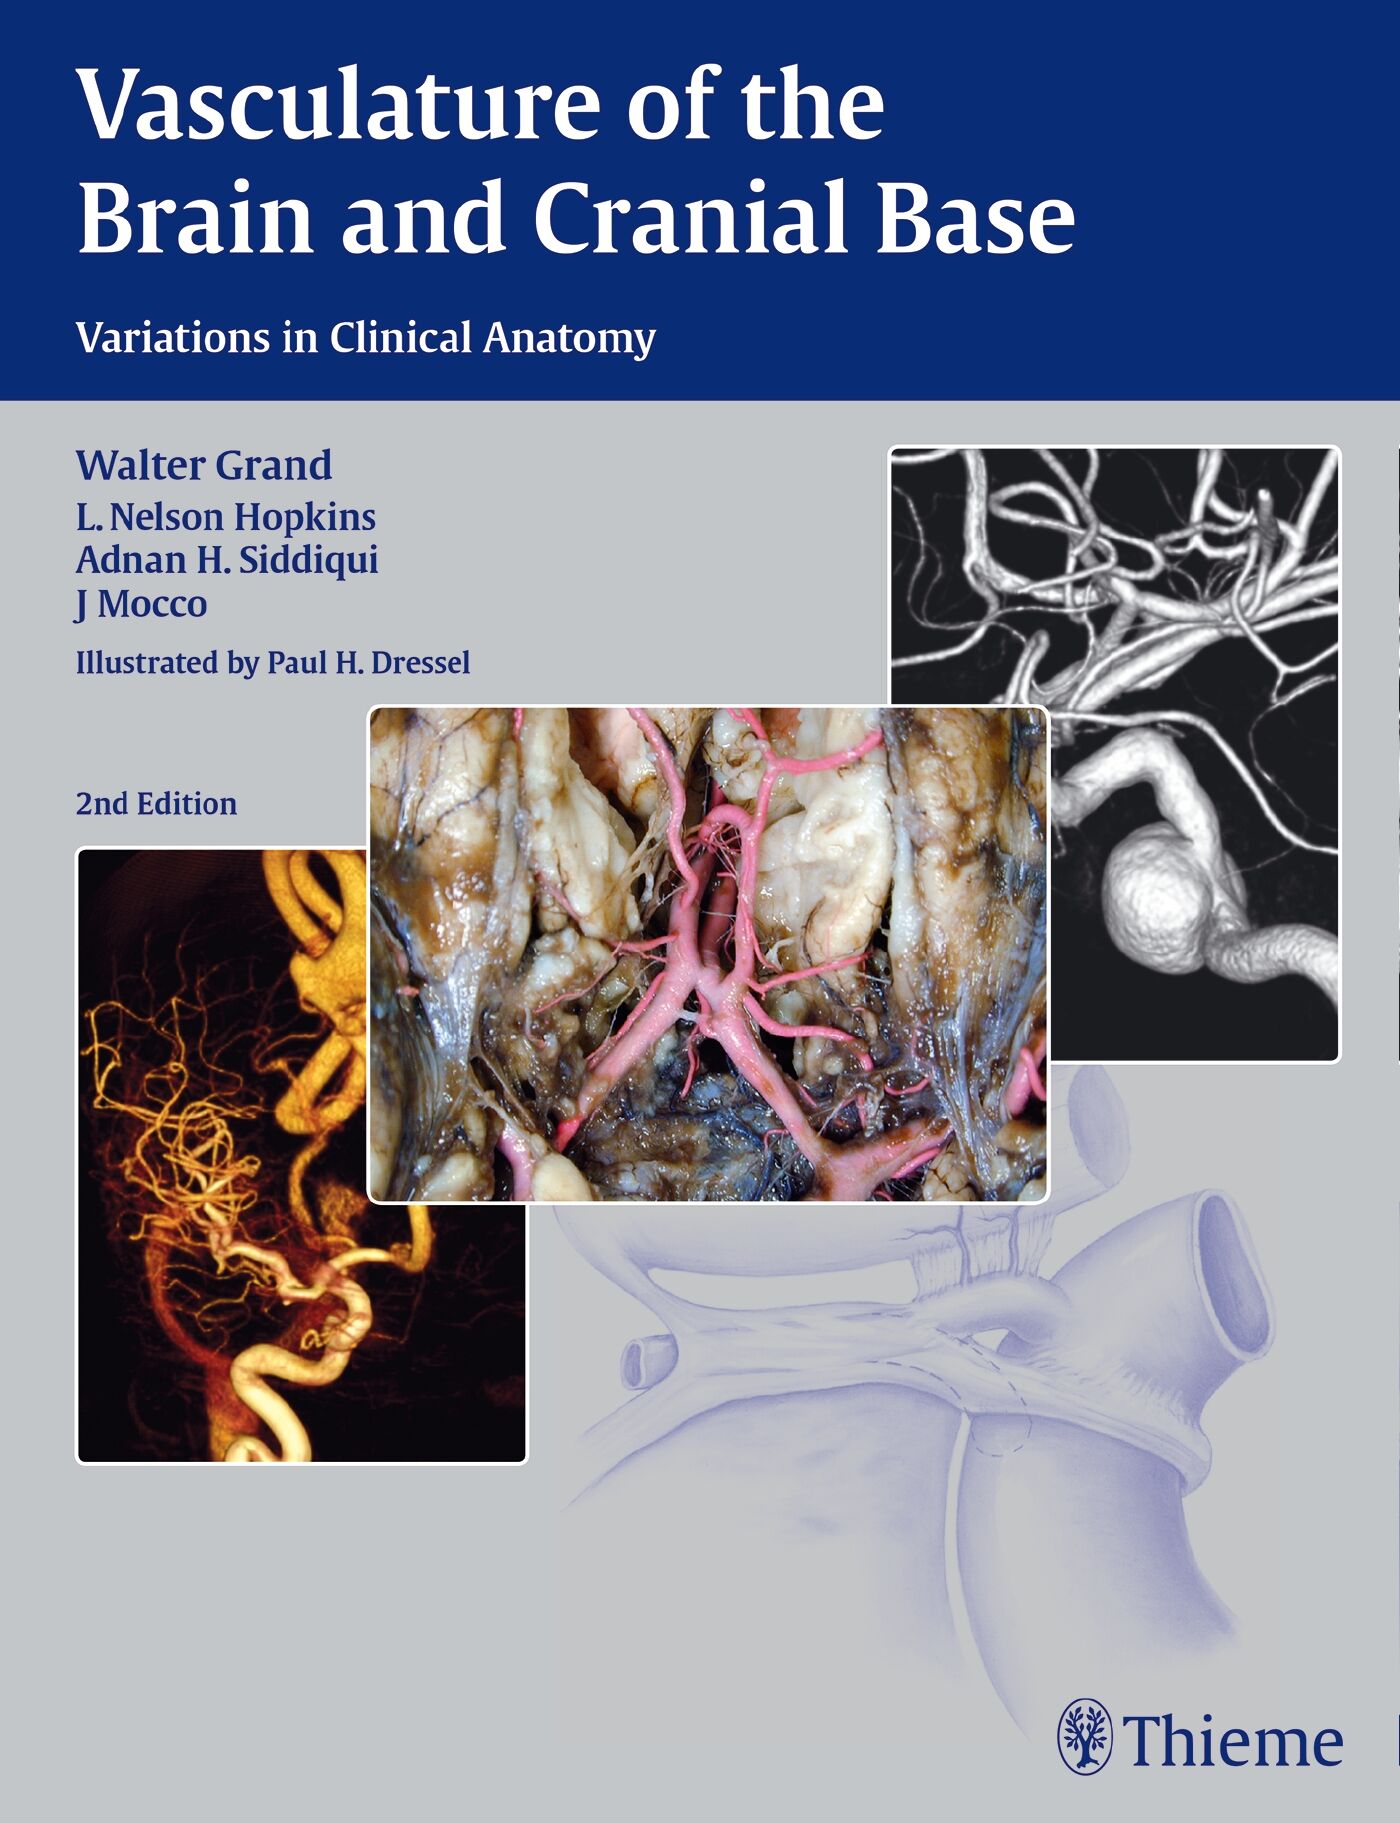 Vasculature of the Brain and Cranial Base, 9781604068856